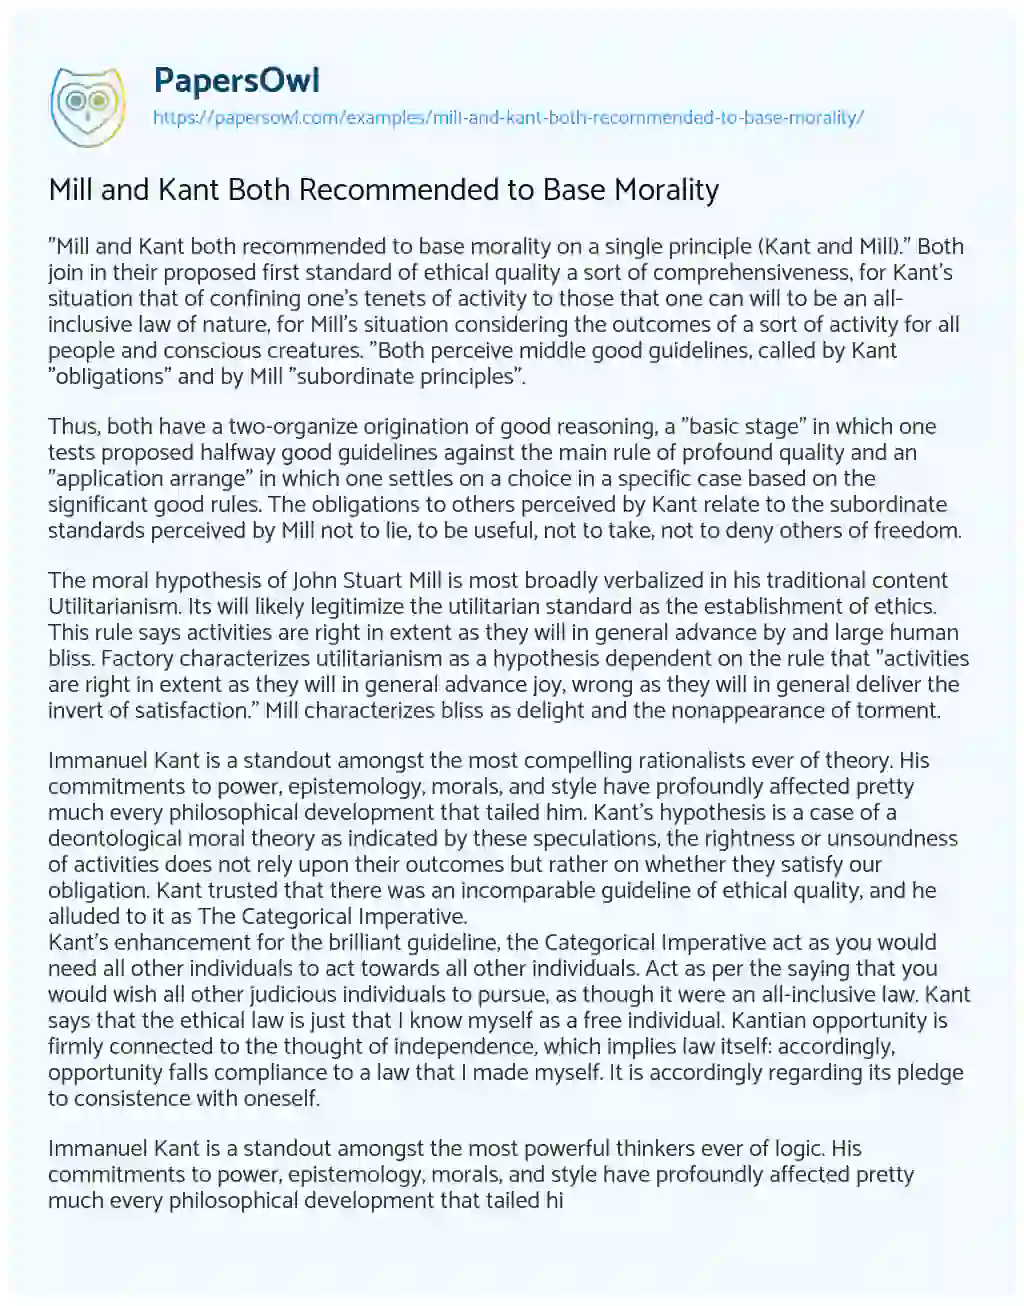 Essay on Mill and Kant both Recommended to Base Morality